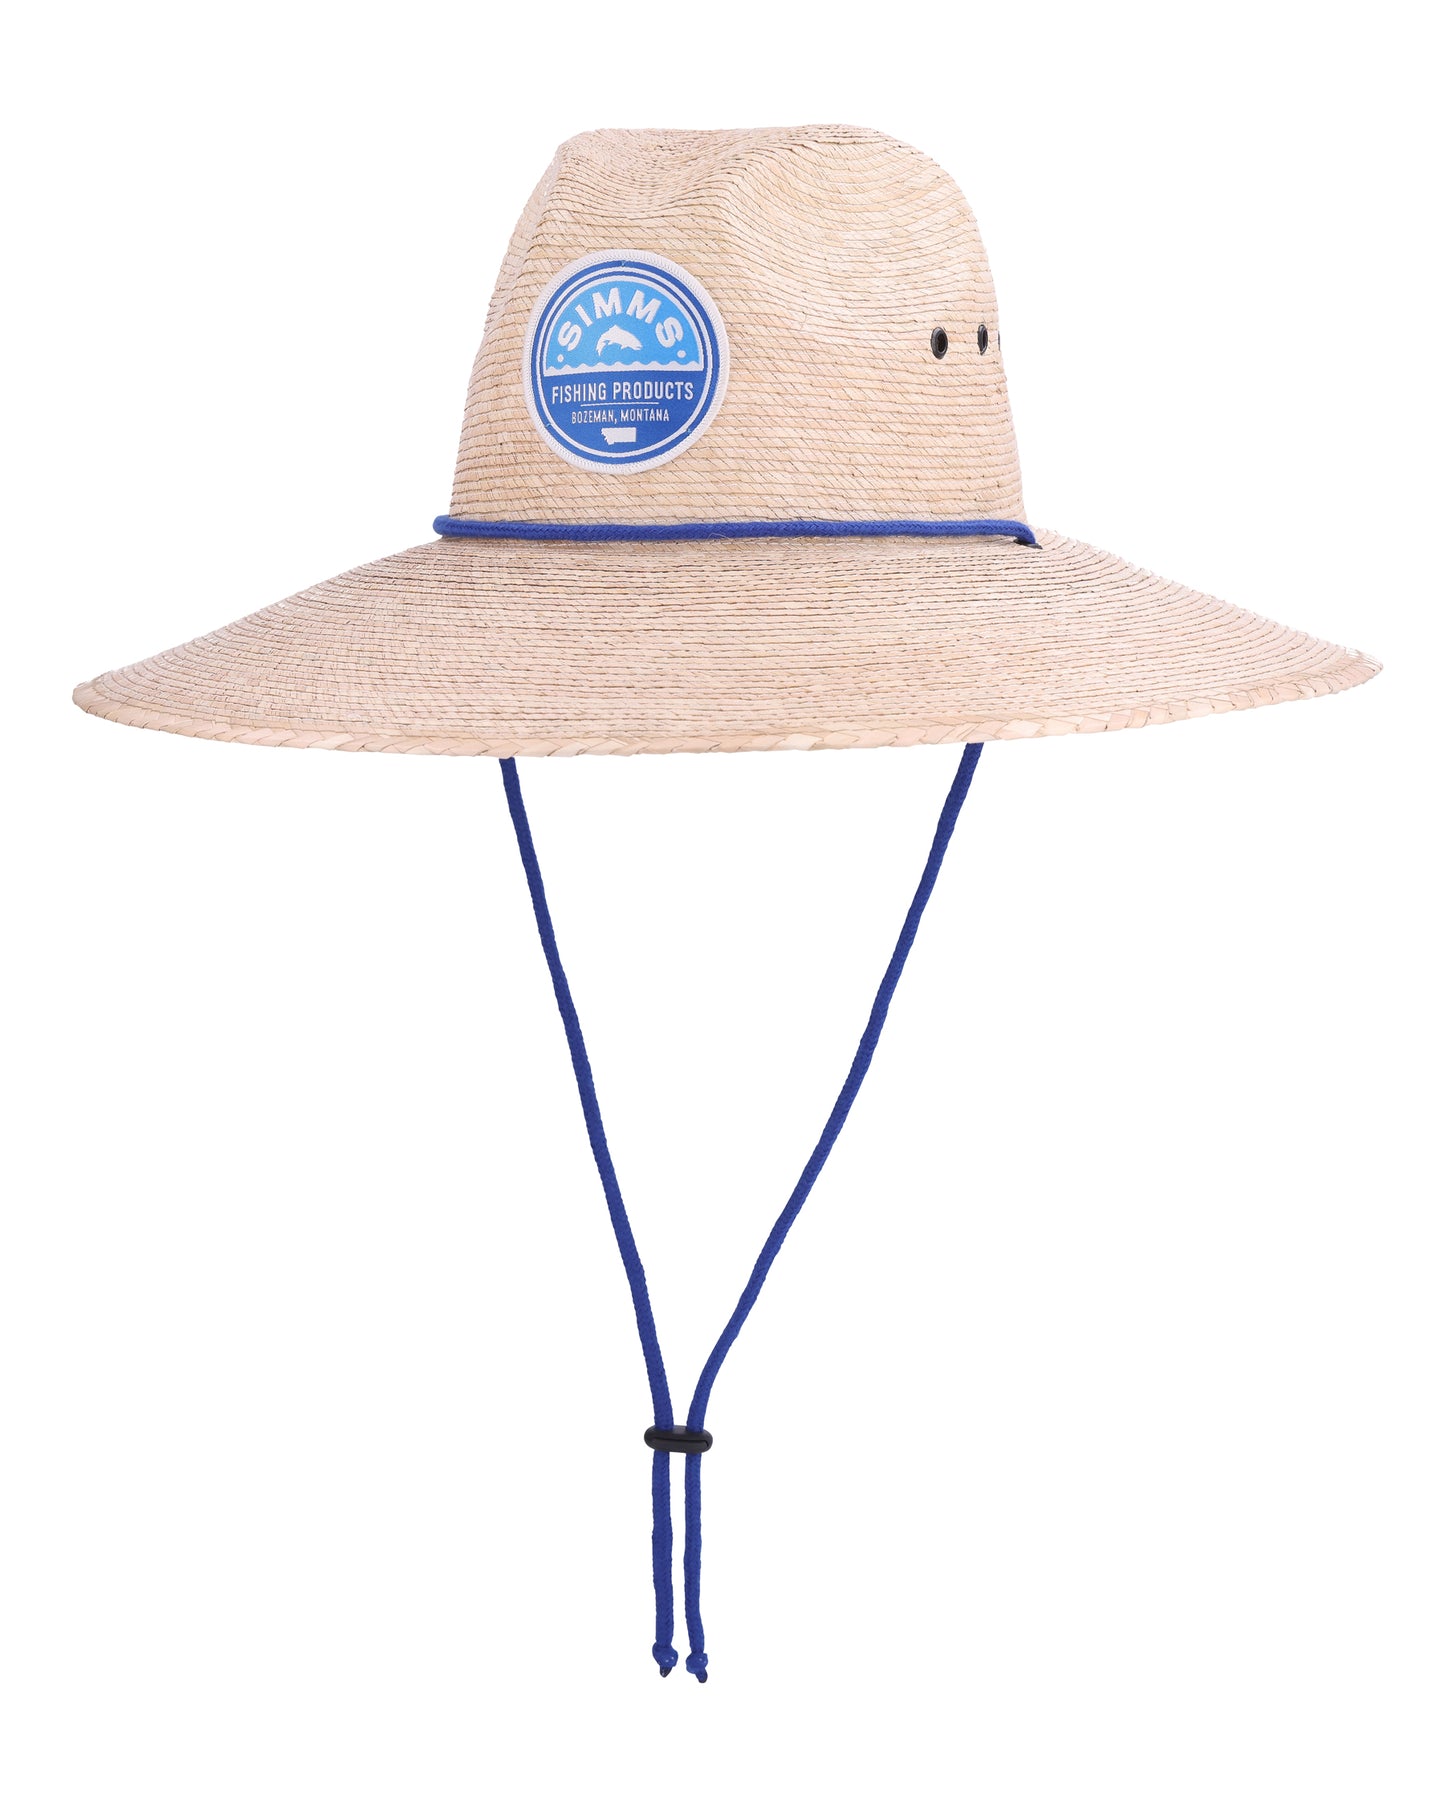 Cutbank Sun Hat  Simms Fishing Products